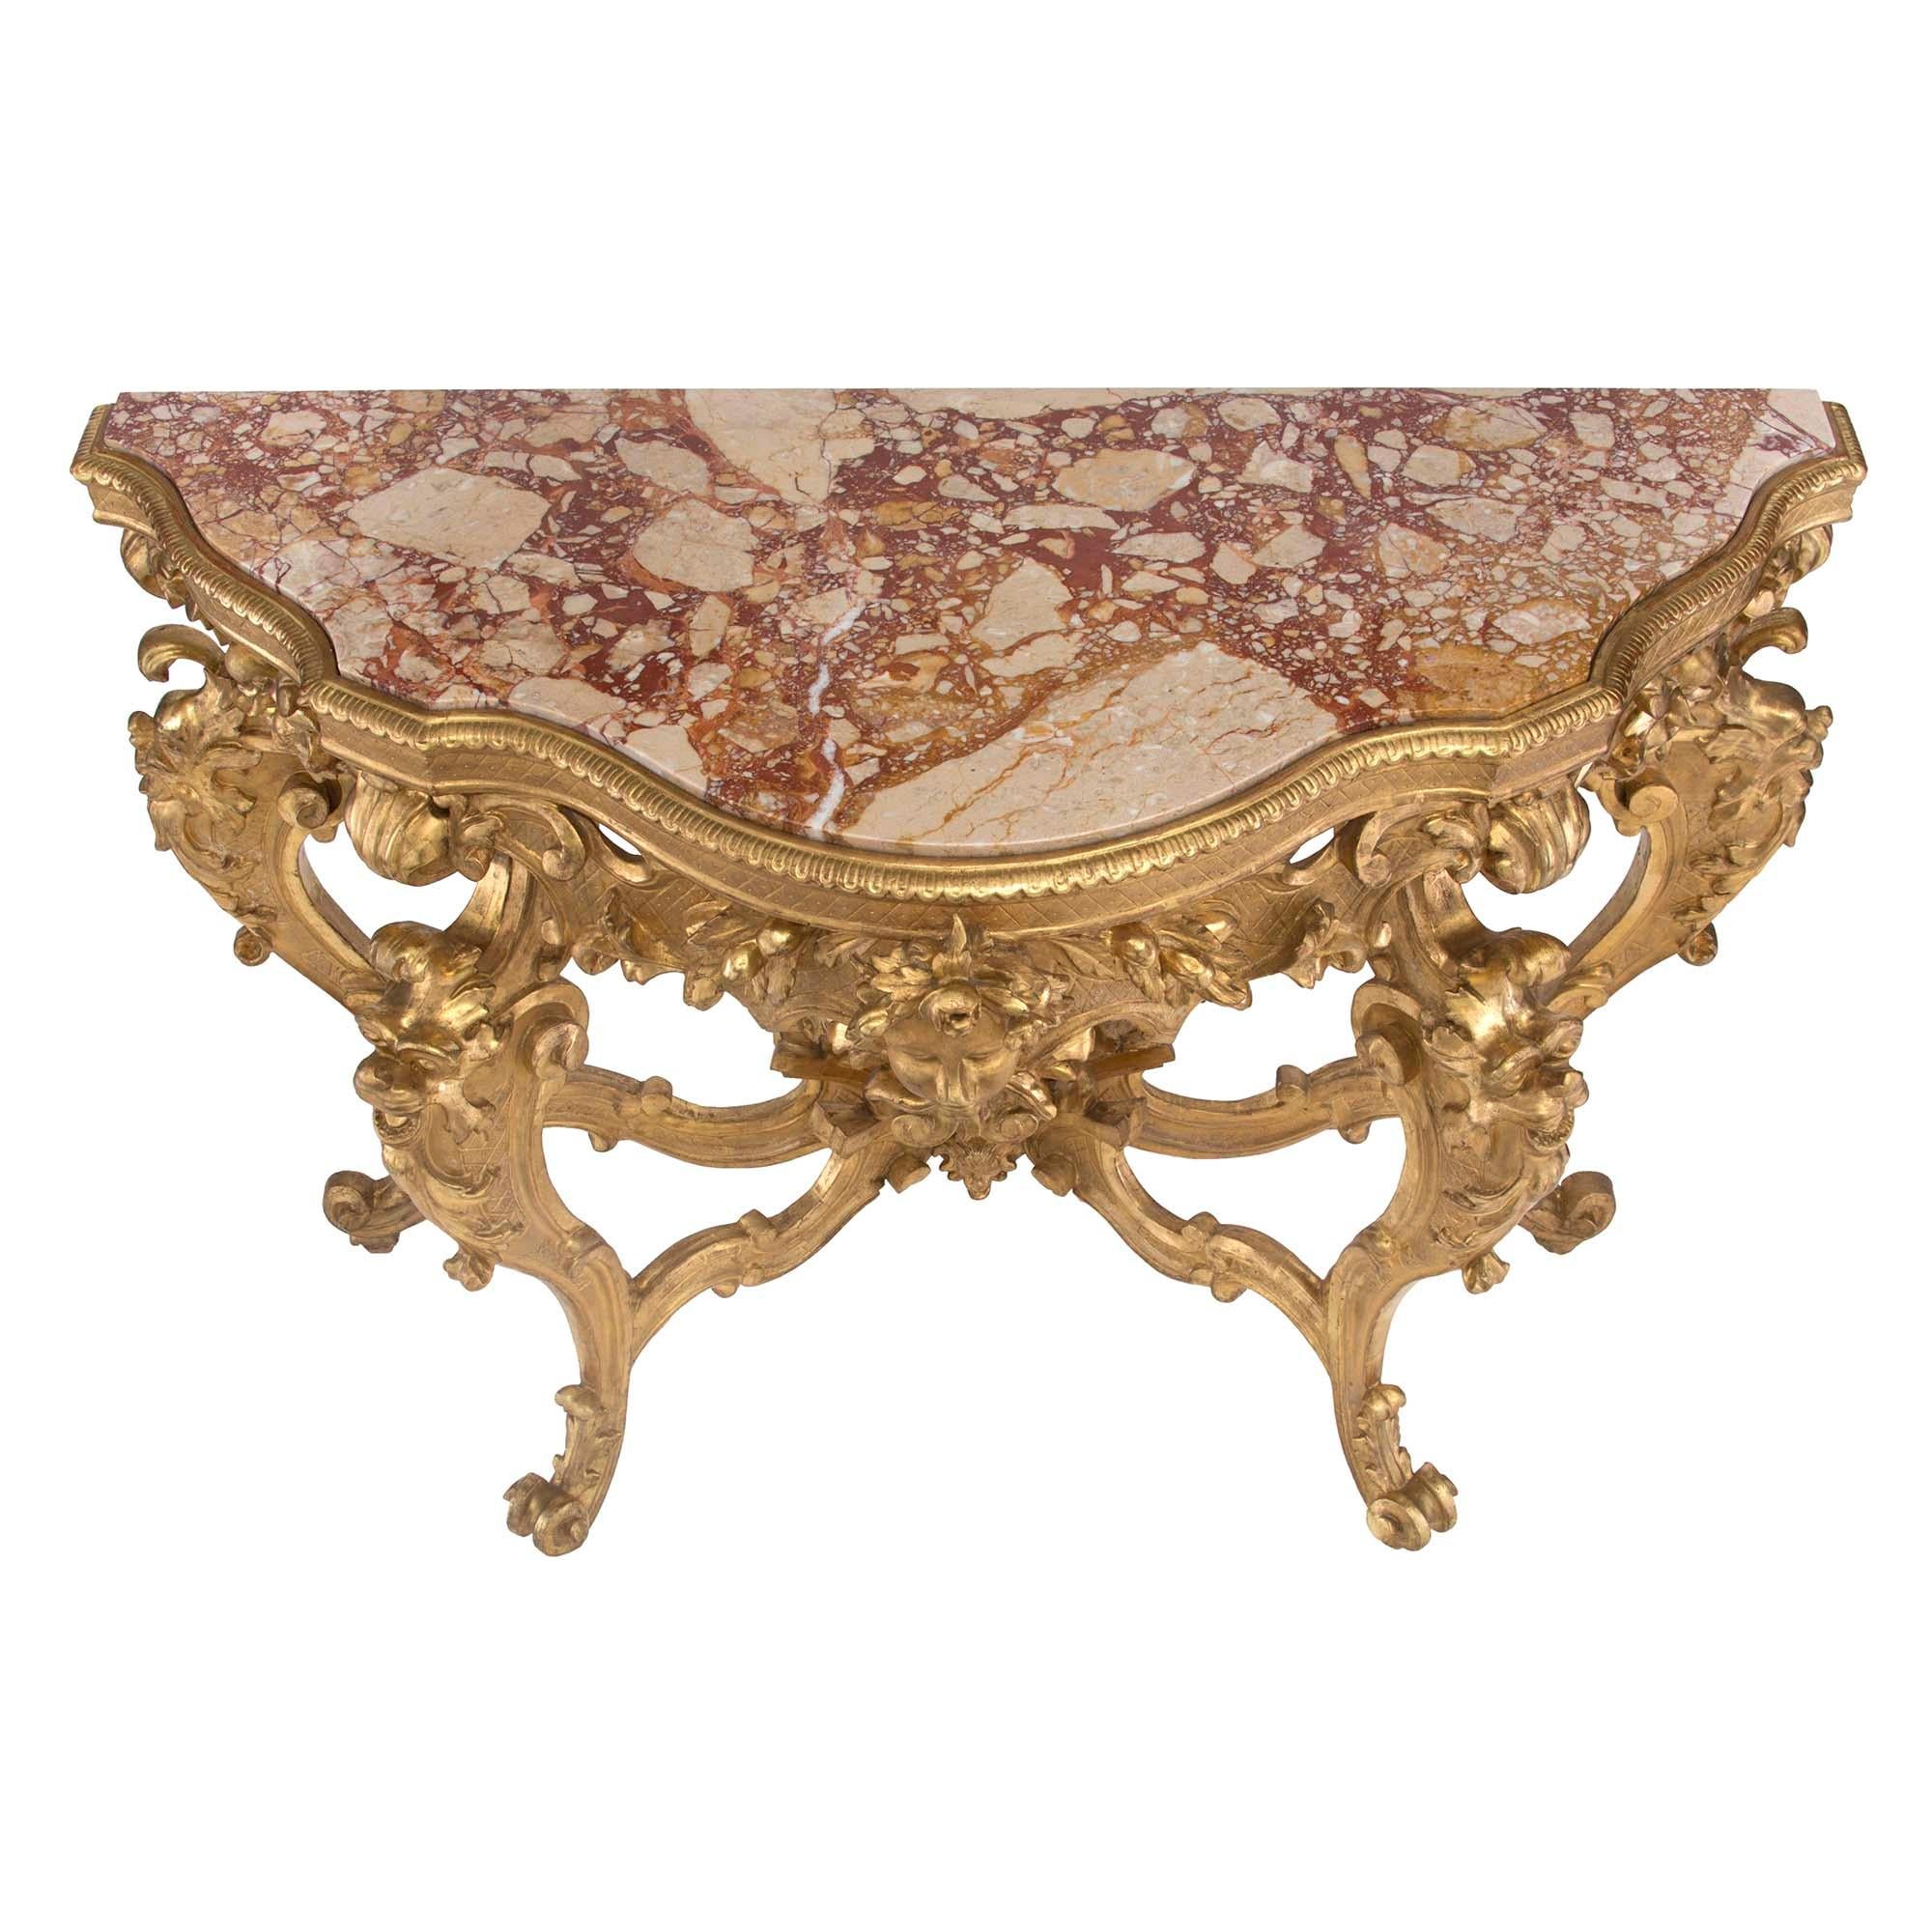 A spectacular and most impressive Italian 19th century Baroque giltwood and marble free standing console. The console is raised by elongated 